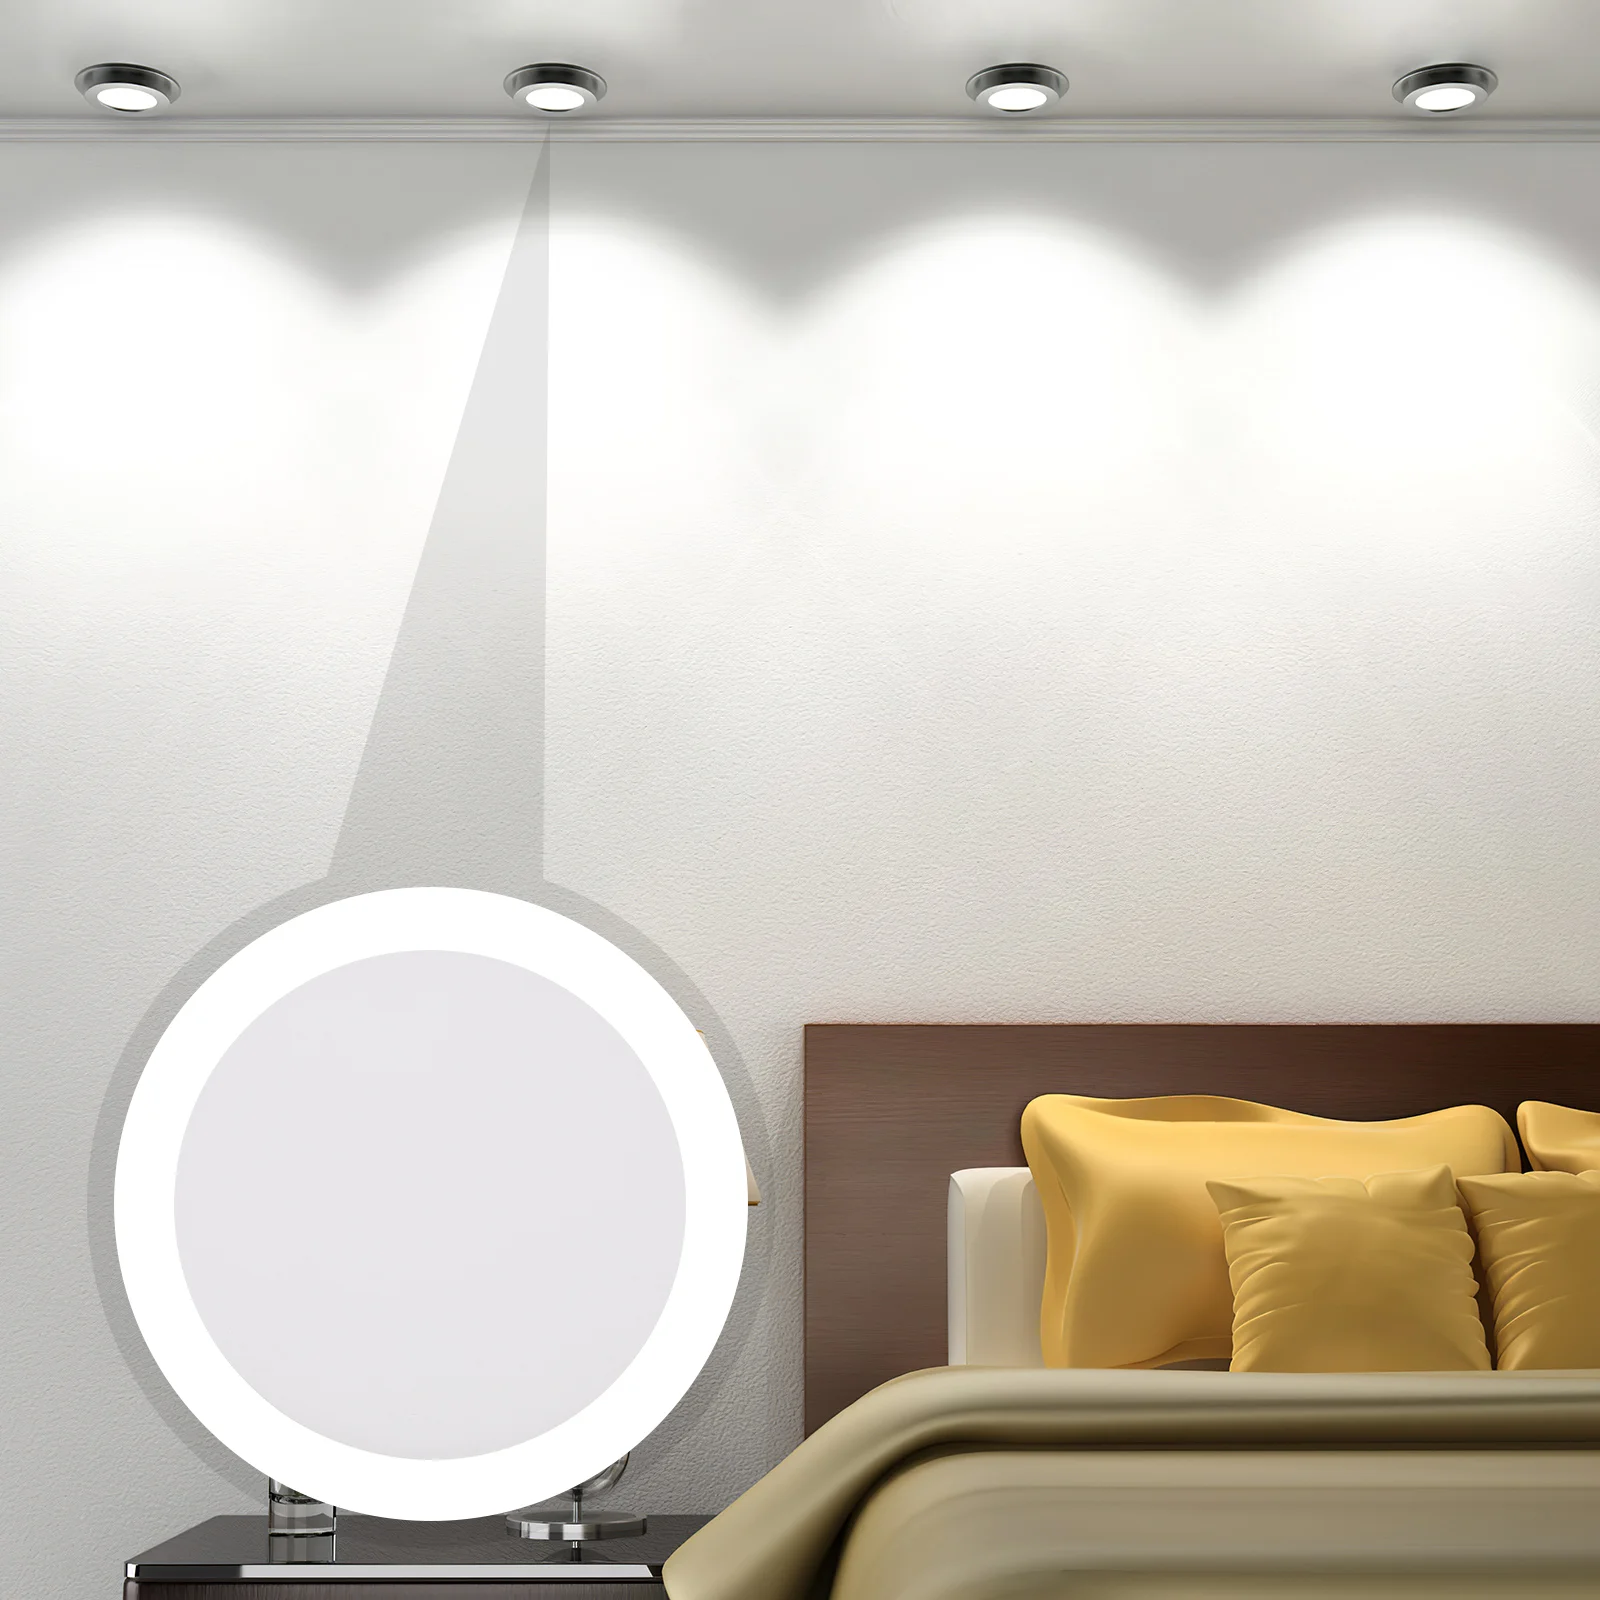 

Lamp Diffusion Plates Lighting Recessed Bottom Covers LED Ceiling Diffuser Downlight Shading Shades